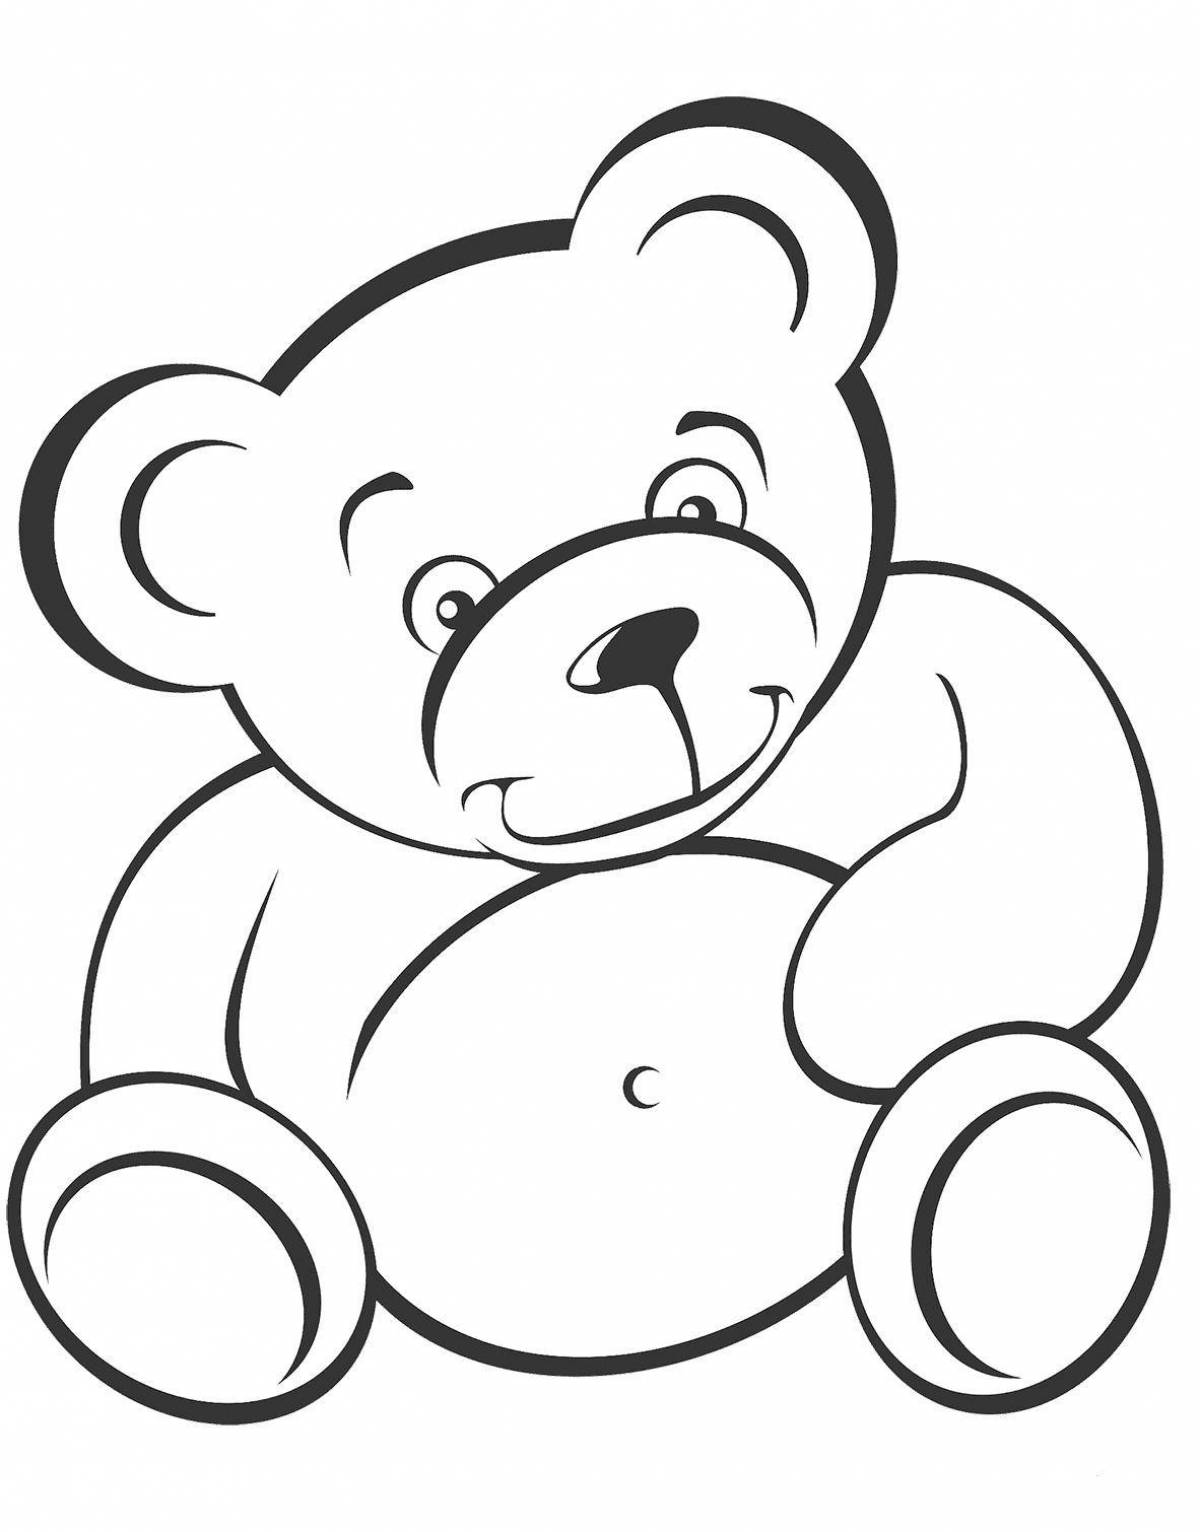 Fun bear coloring book for 4-5 year olds